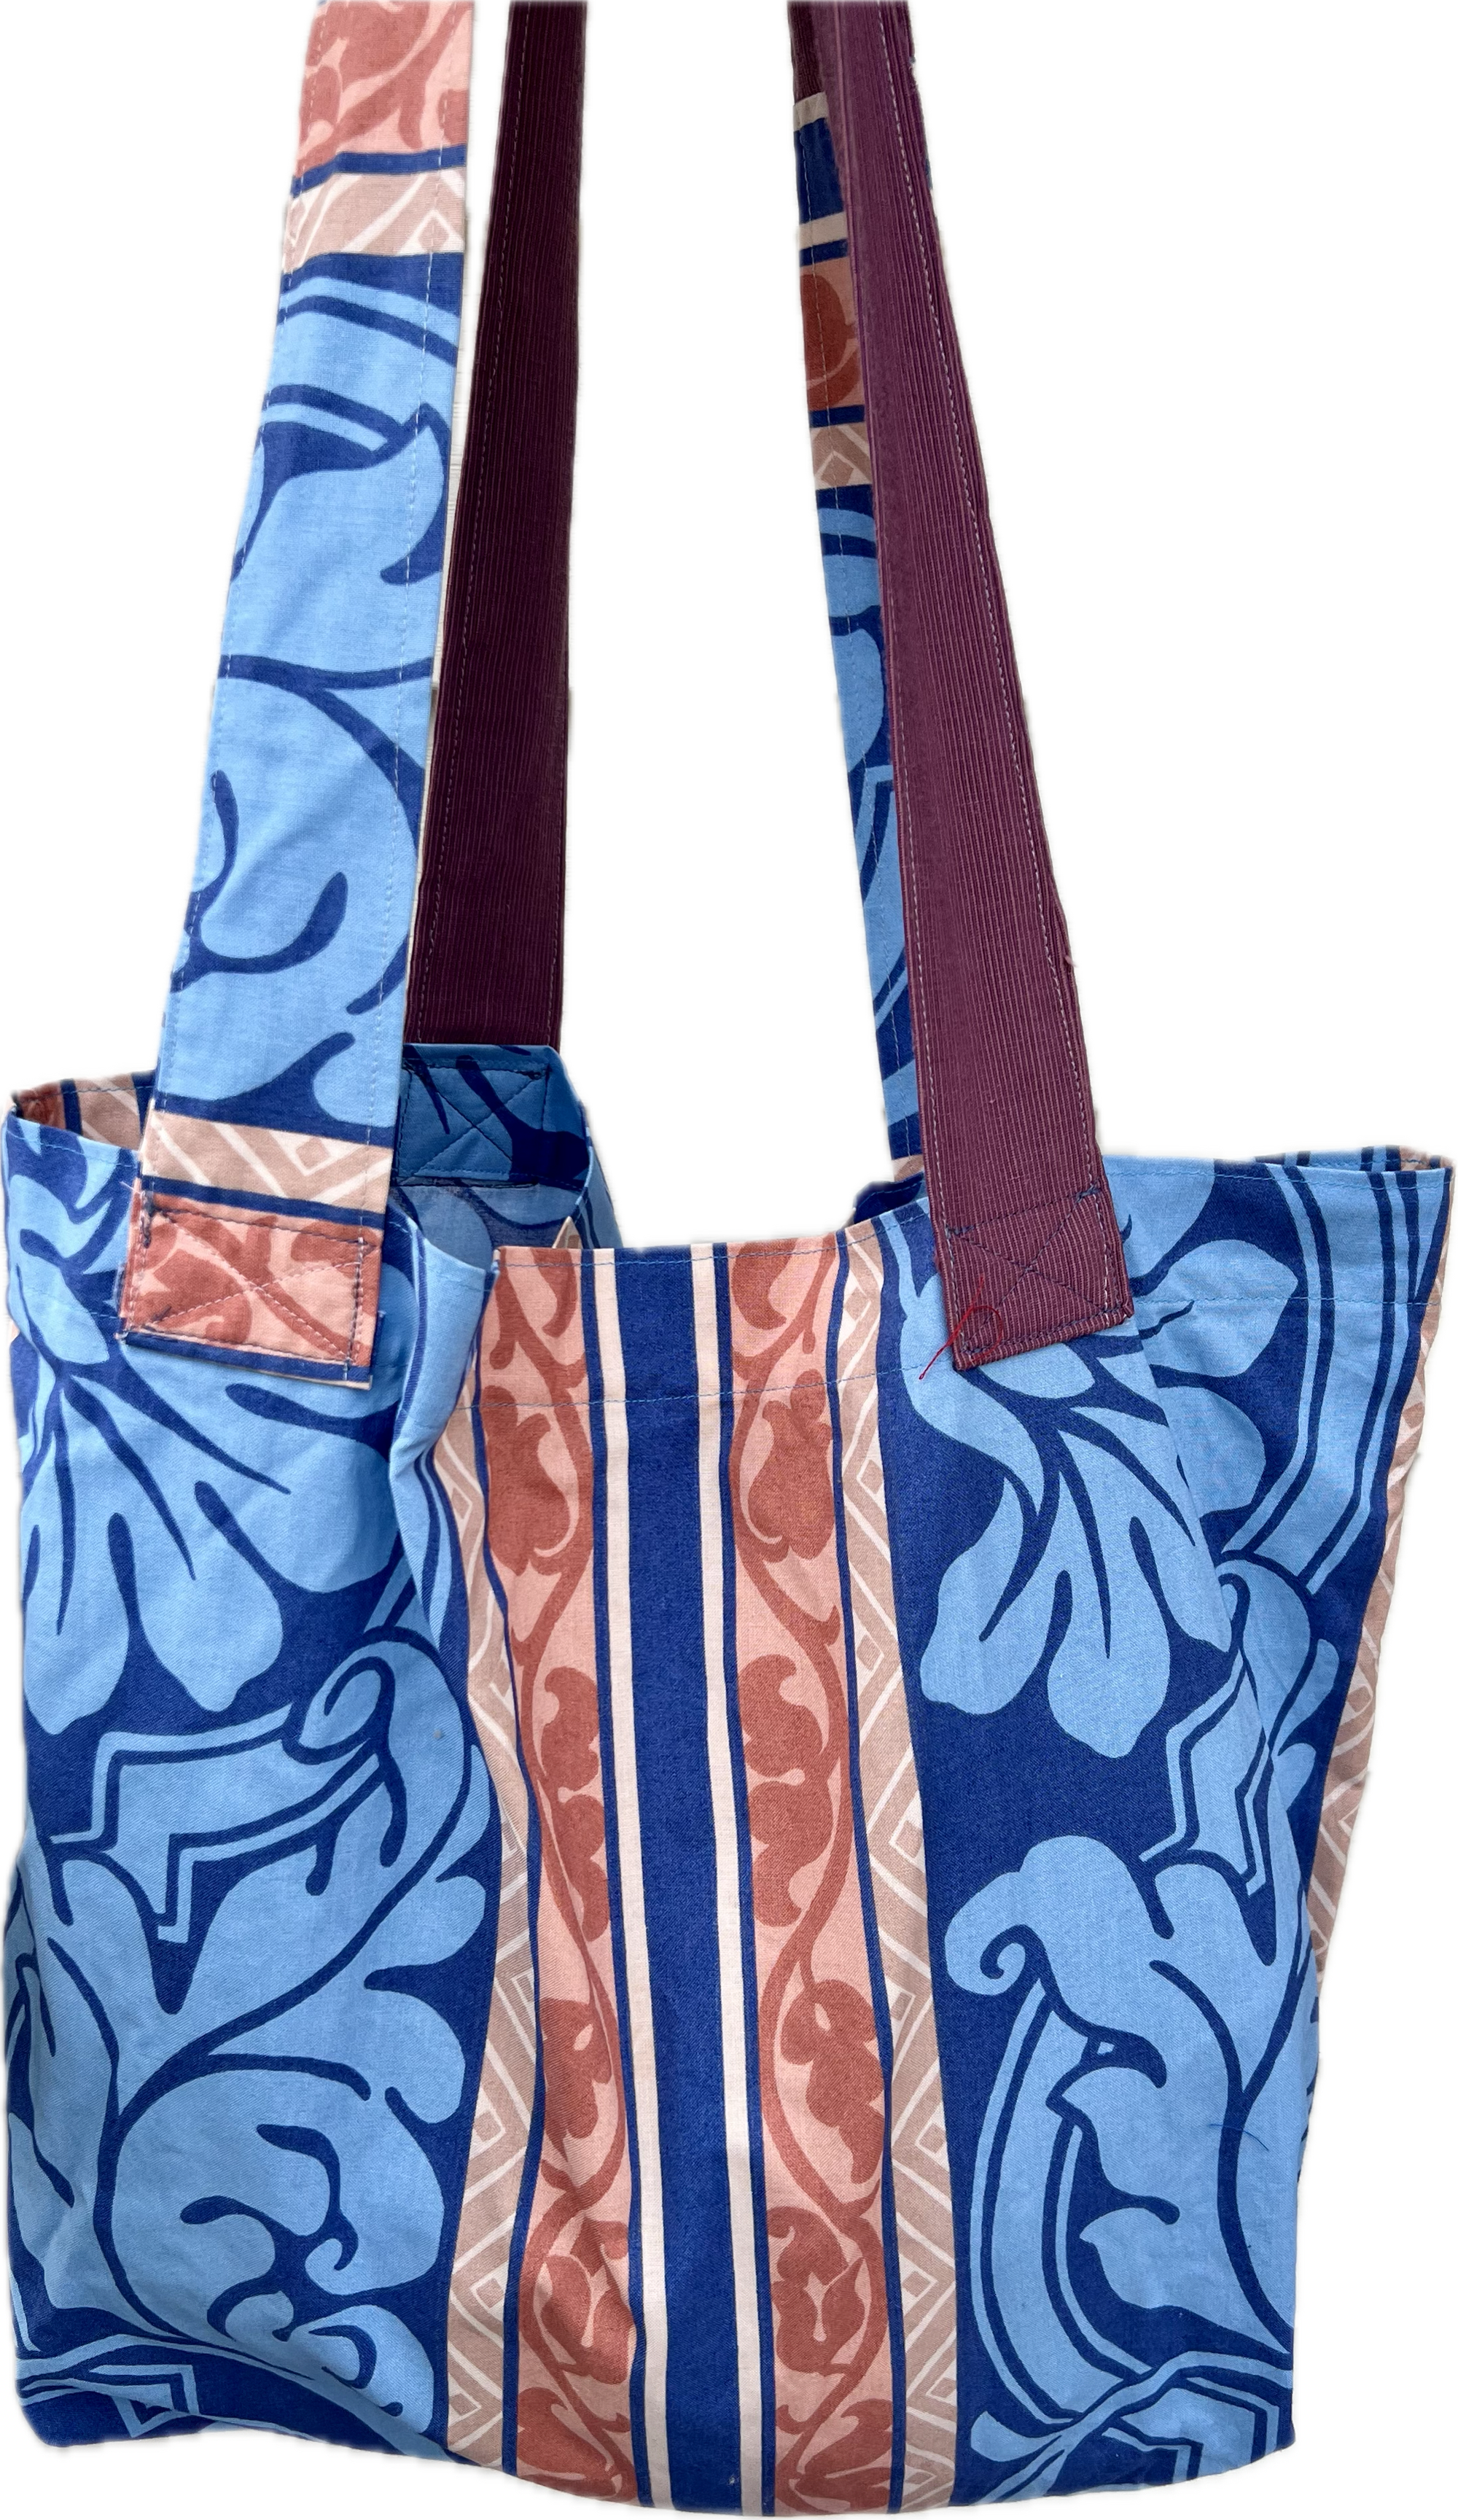 Market Grocery Tote Bag Blue Peach Large Print Damask